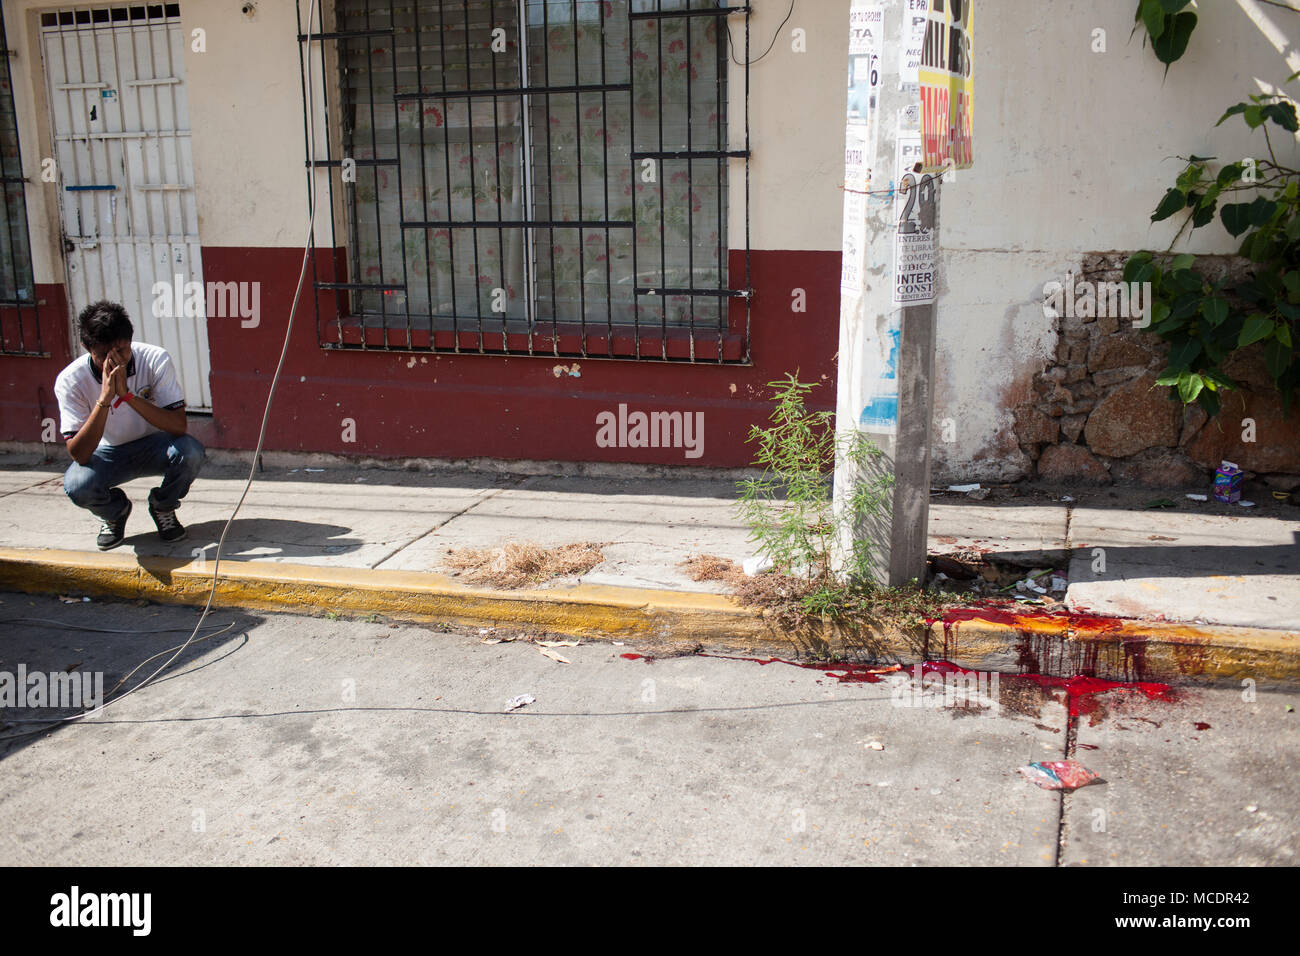 A family member of Acapulco Police Force lawyer Jesœs Antonio Lemus Beltr‡n near the scene of his murder in the Colonia Progreso of Acapulco, Guerrero, Mexico on Wednesday, November 18, 2015. Beltr‡n was murdered leaving his house.   Acapulco is one of Mexico's best known beach resorts, hosting many famous celebrities during the 1950s. However, constant violence has largely affected the city's international image and foreign tourism numbers. Stock Photo